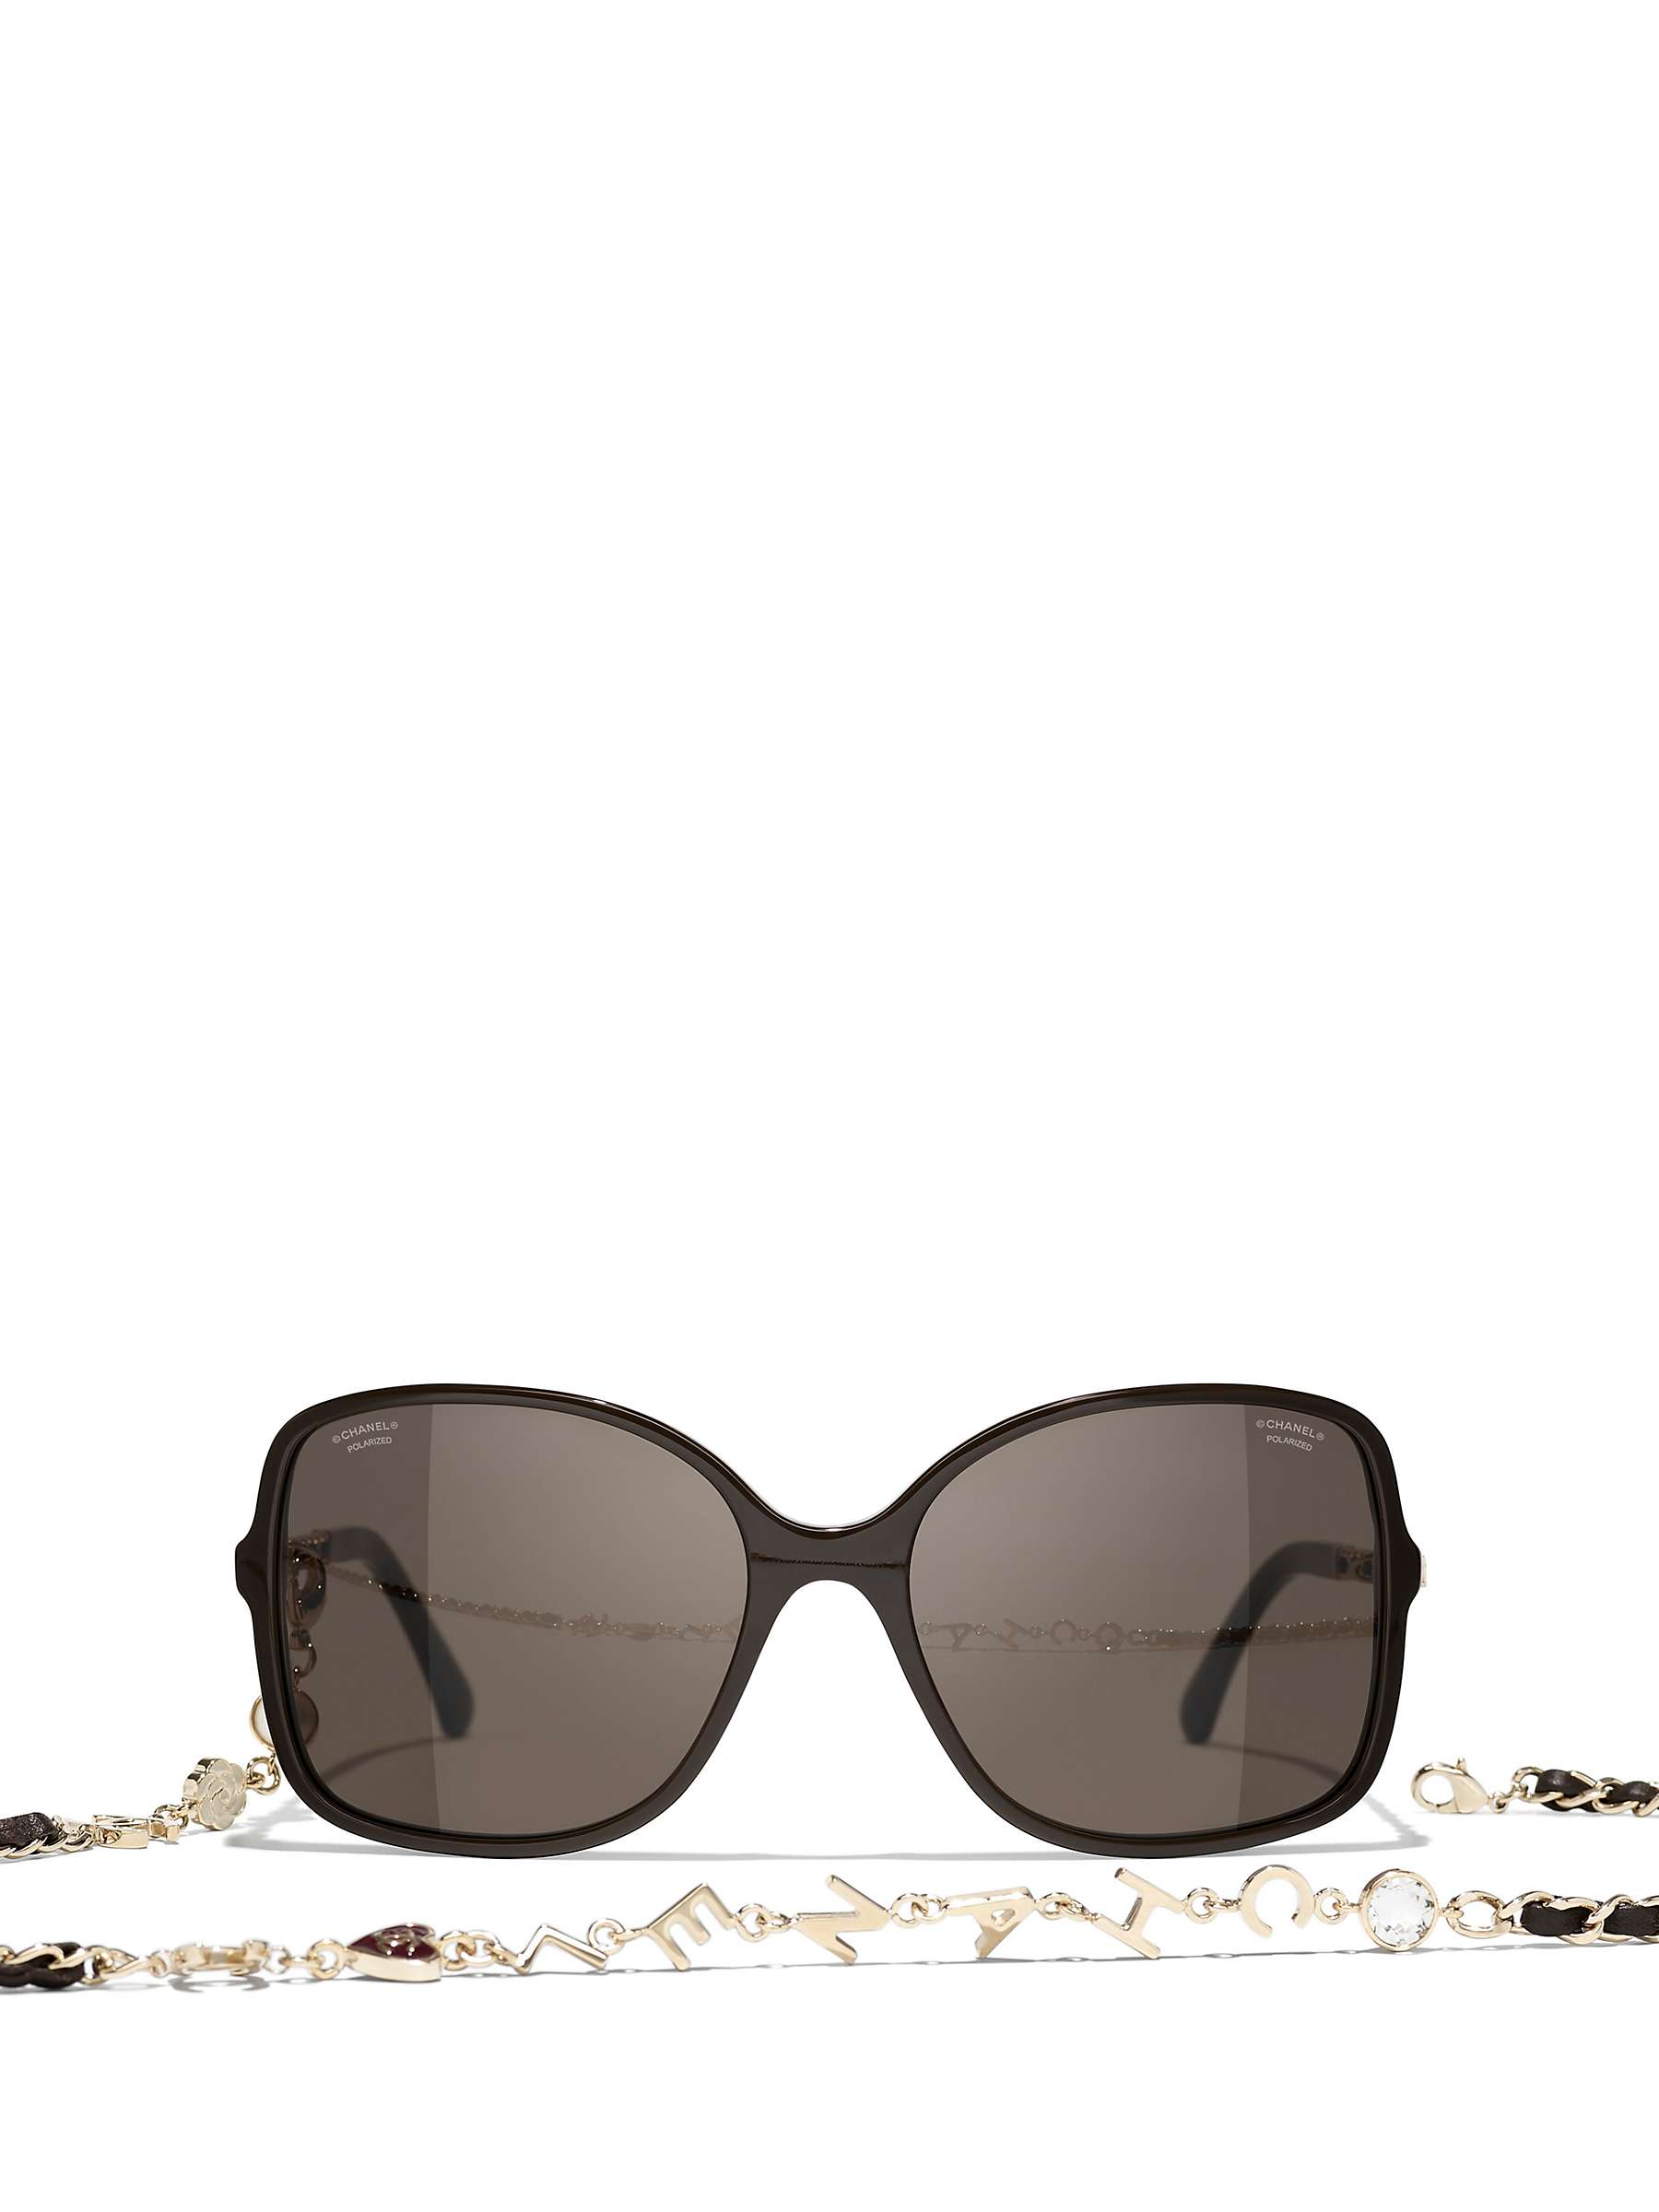 Buy CHANEL Square Sunglasses CH5210Q Brown Online at johnlewis.com